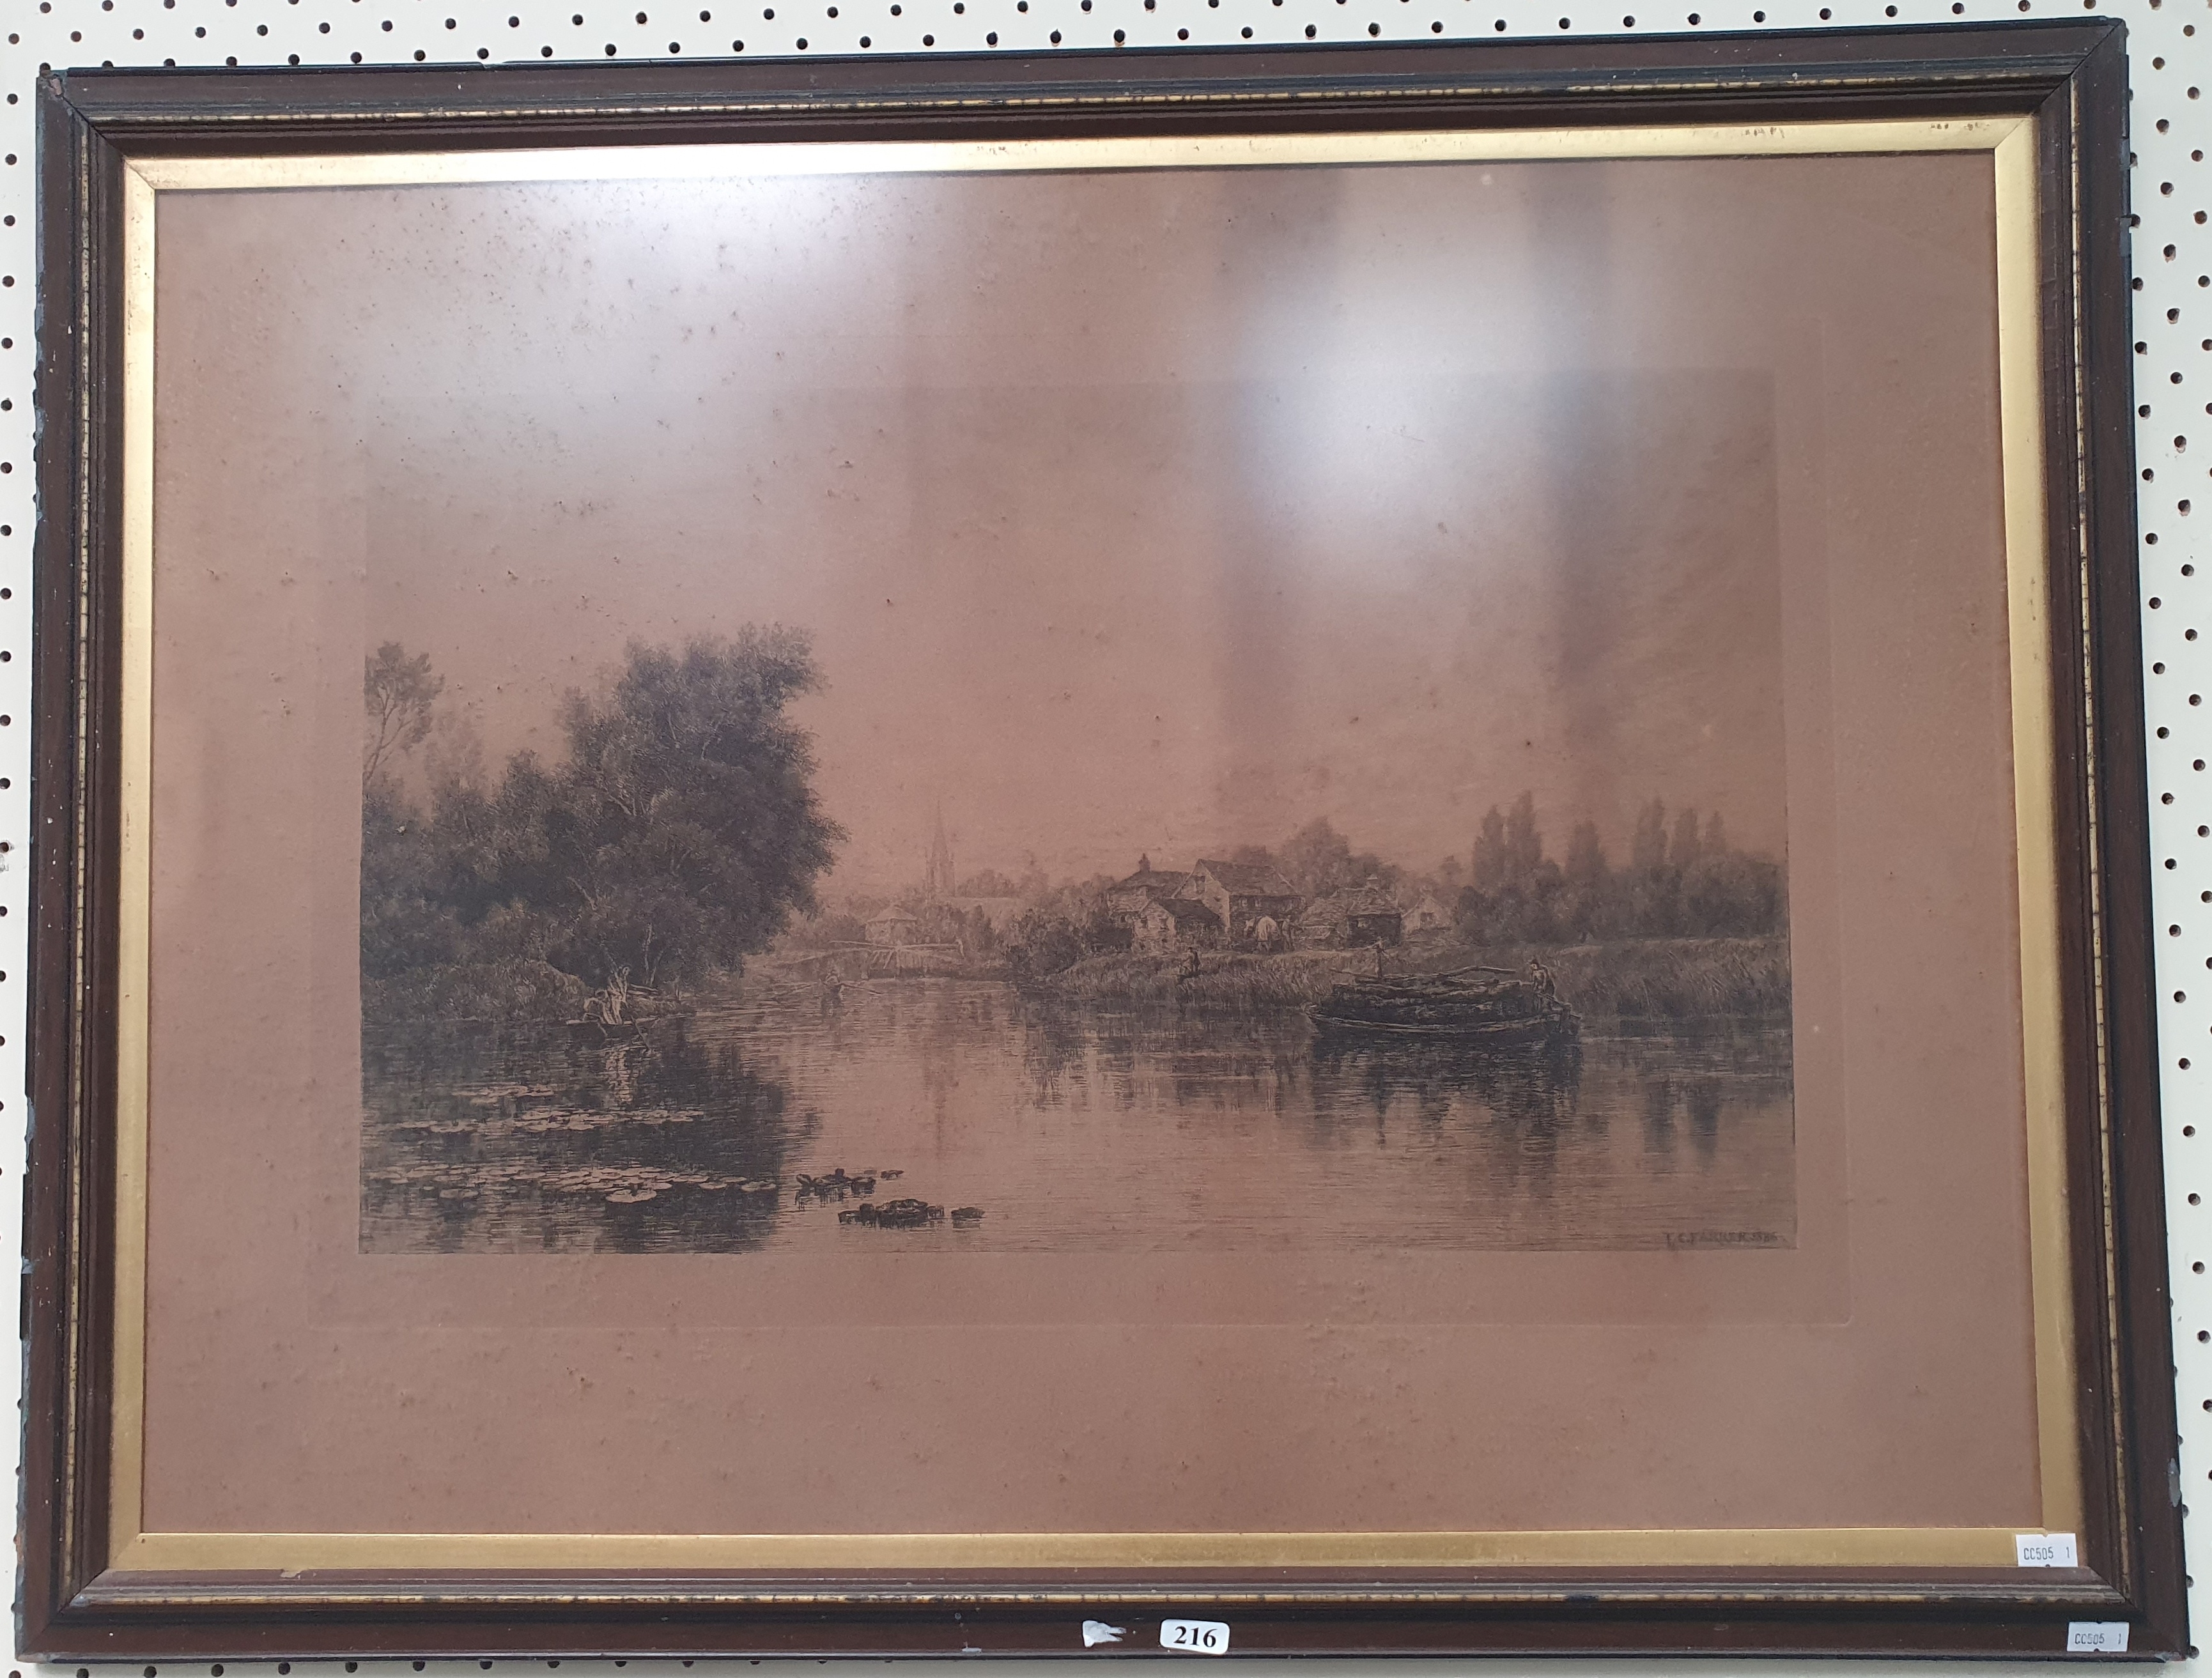 Artwork by Thomas Charles Farrer, Marlow Lock, Made of etching